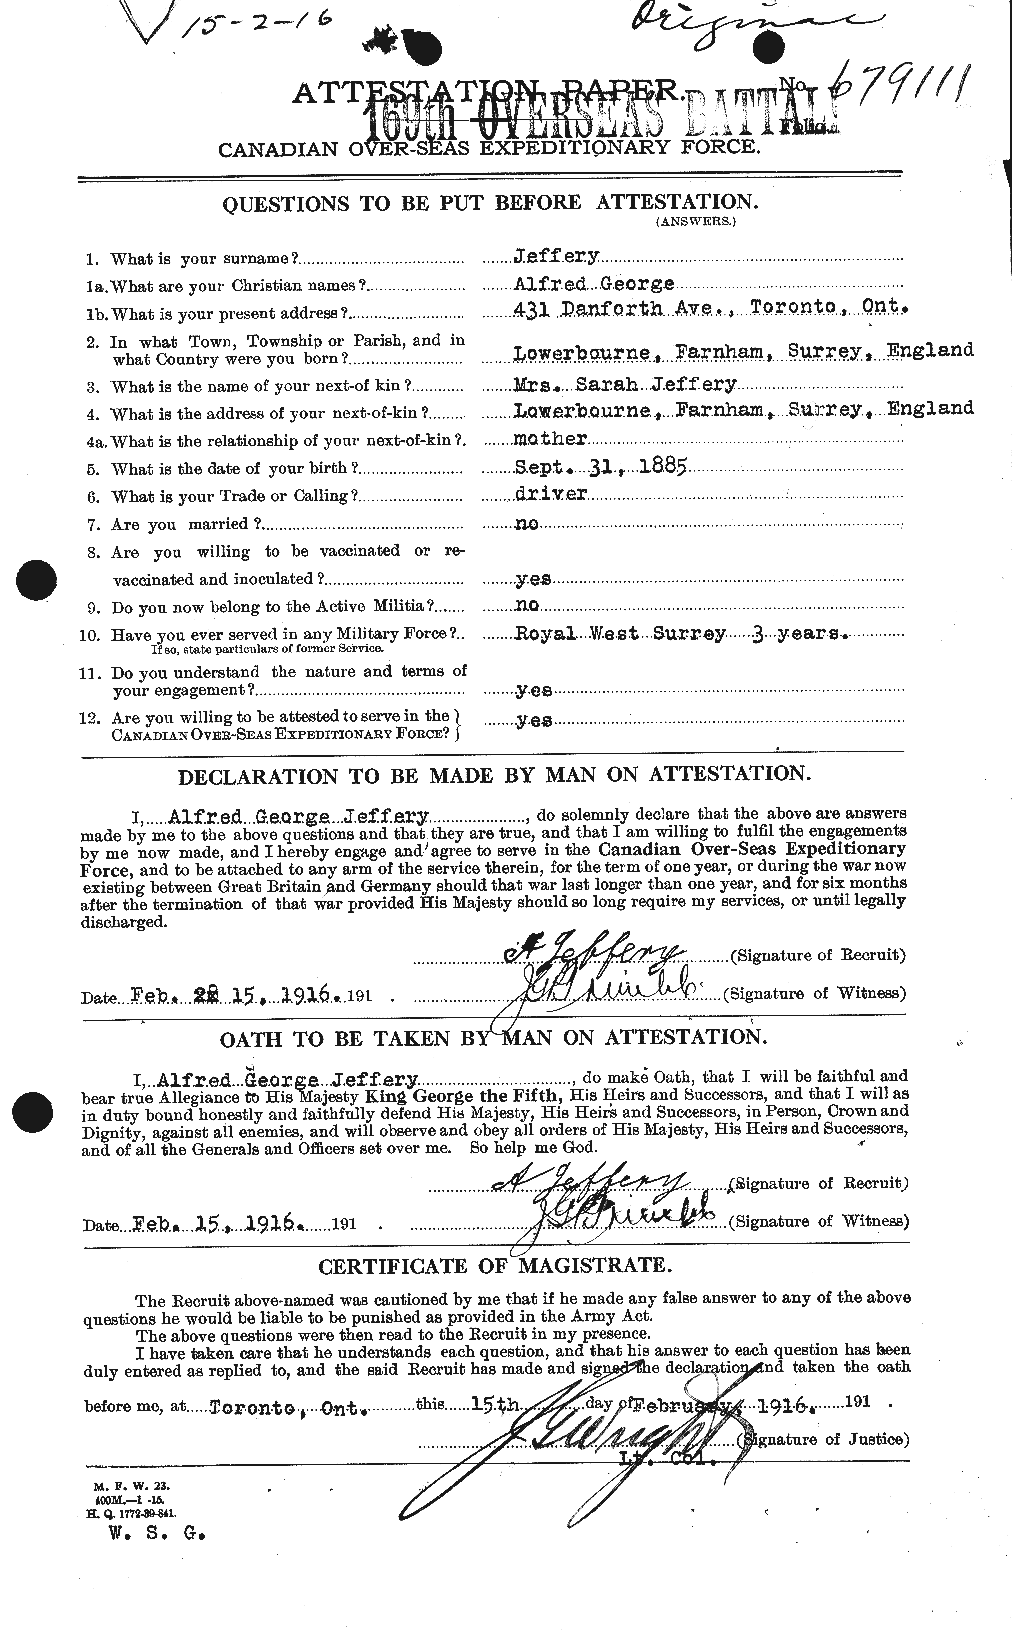 Personnel Records of the First World War - CEF 417706a